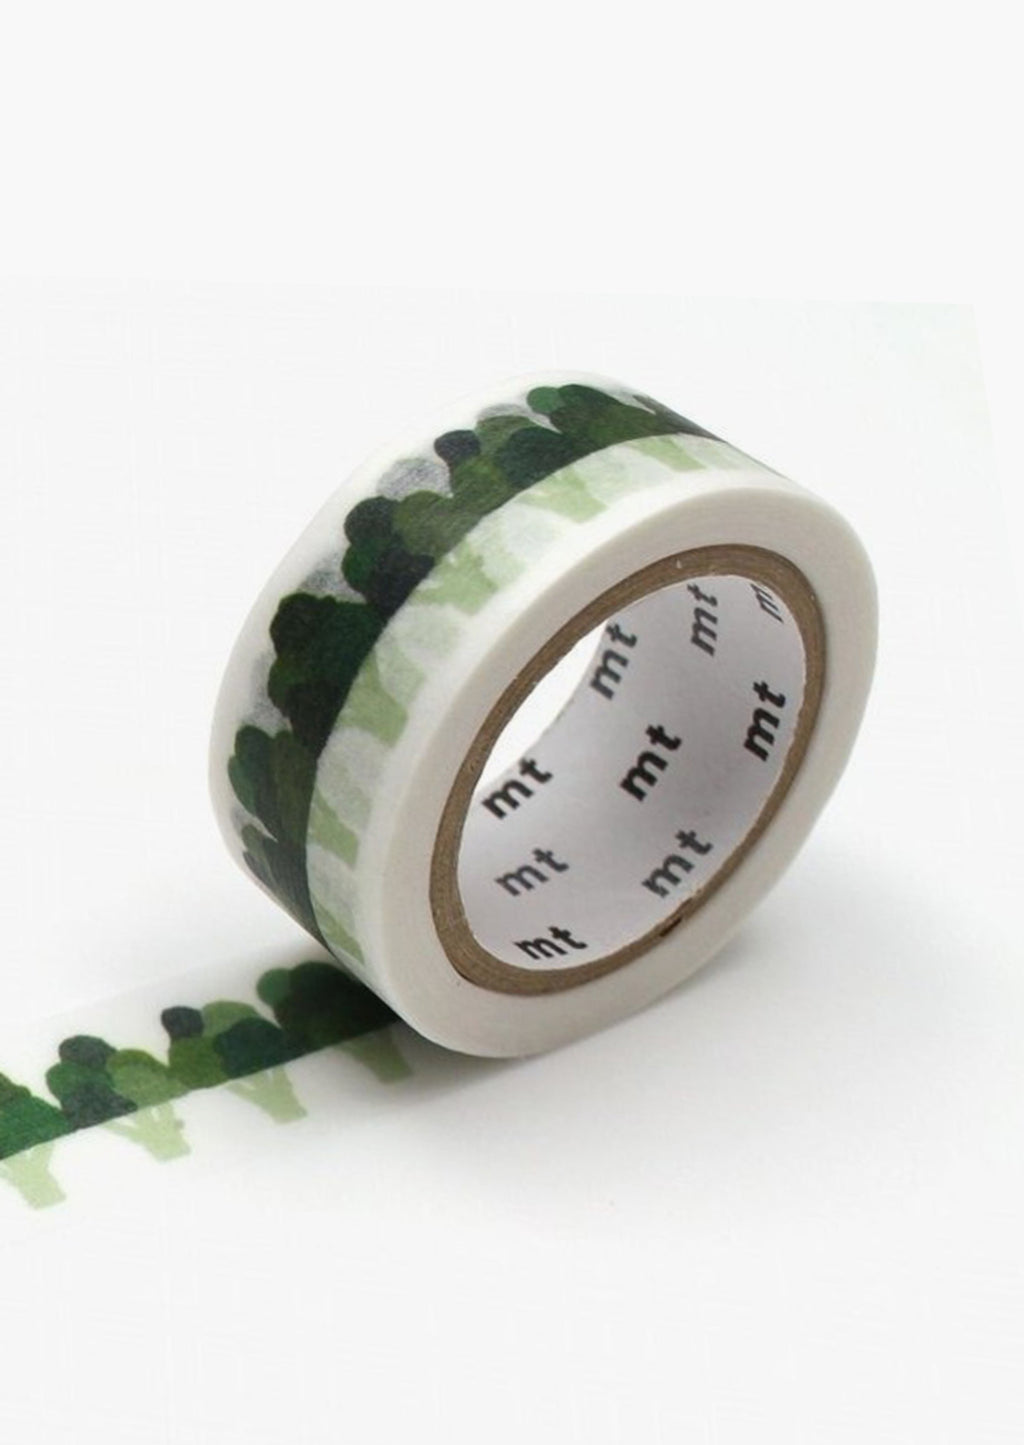 Broccoli: A roll of washi tape with green broccoli pattern.